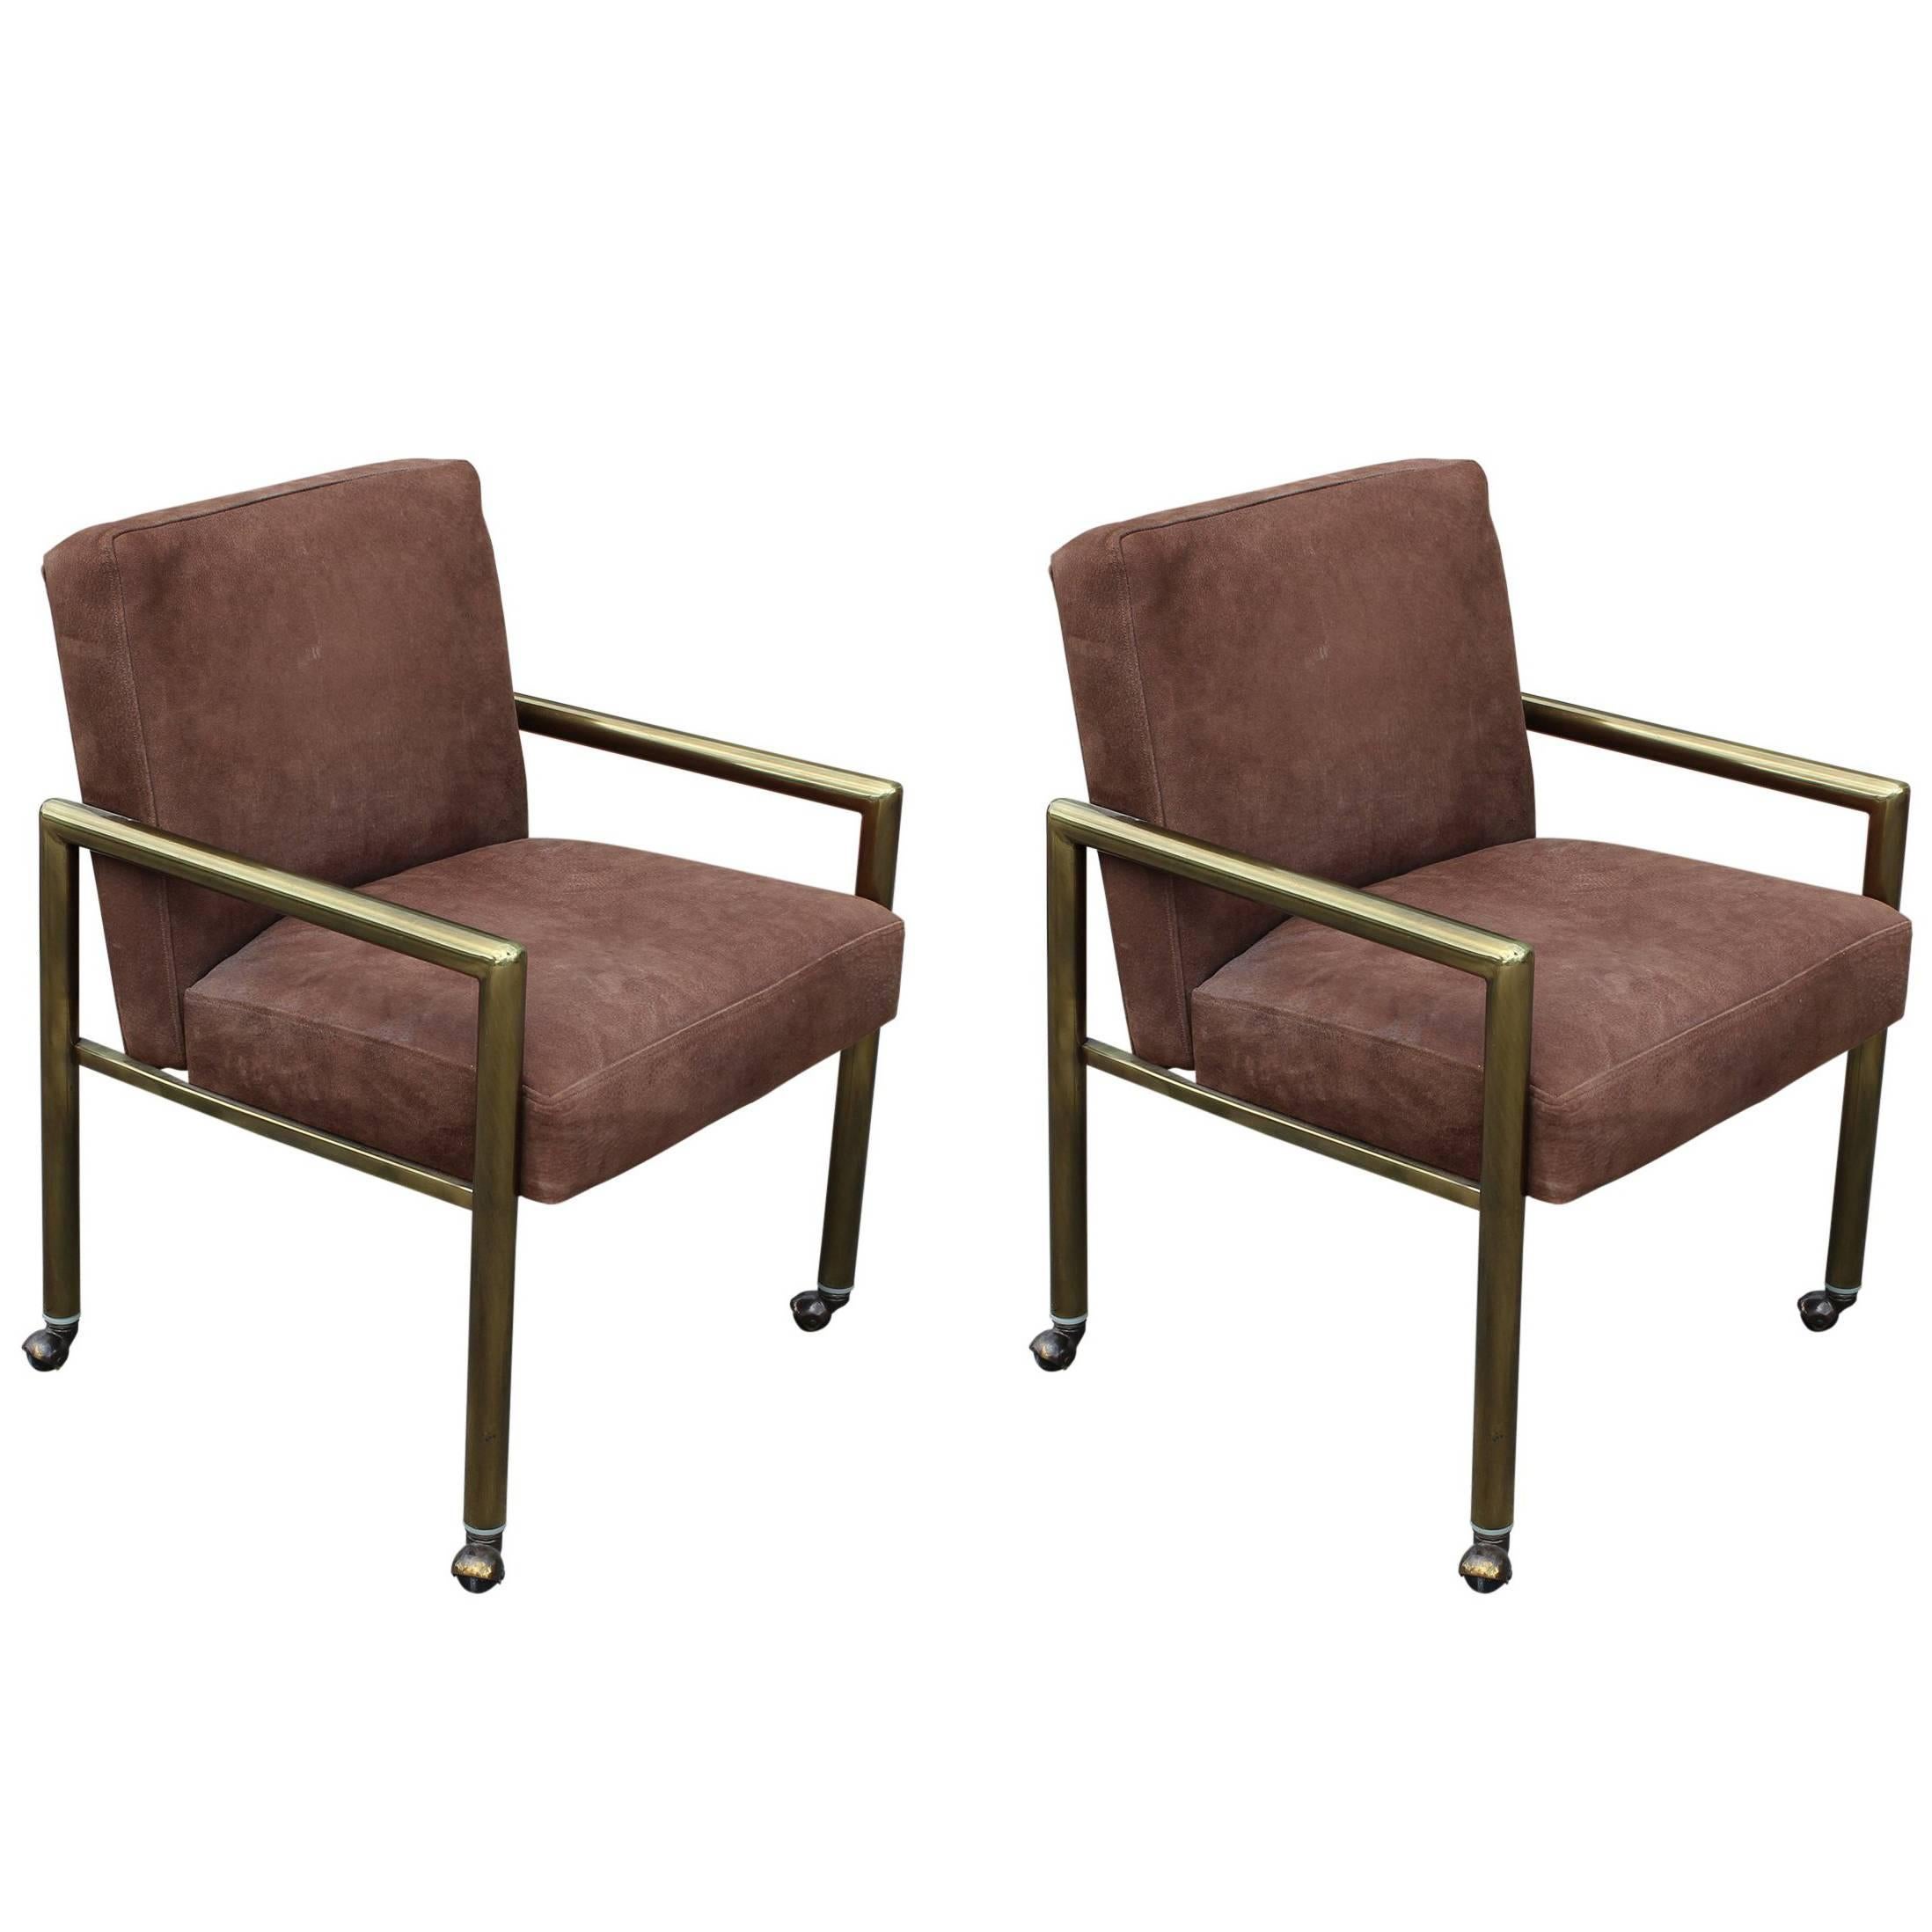 Pair of Modern Brushed Brass and Brown Suede Dining or Lounge Chairs